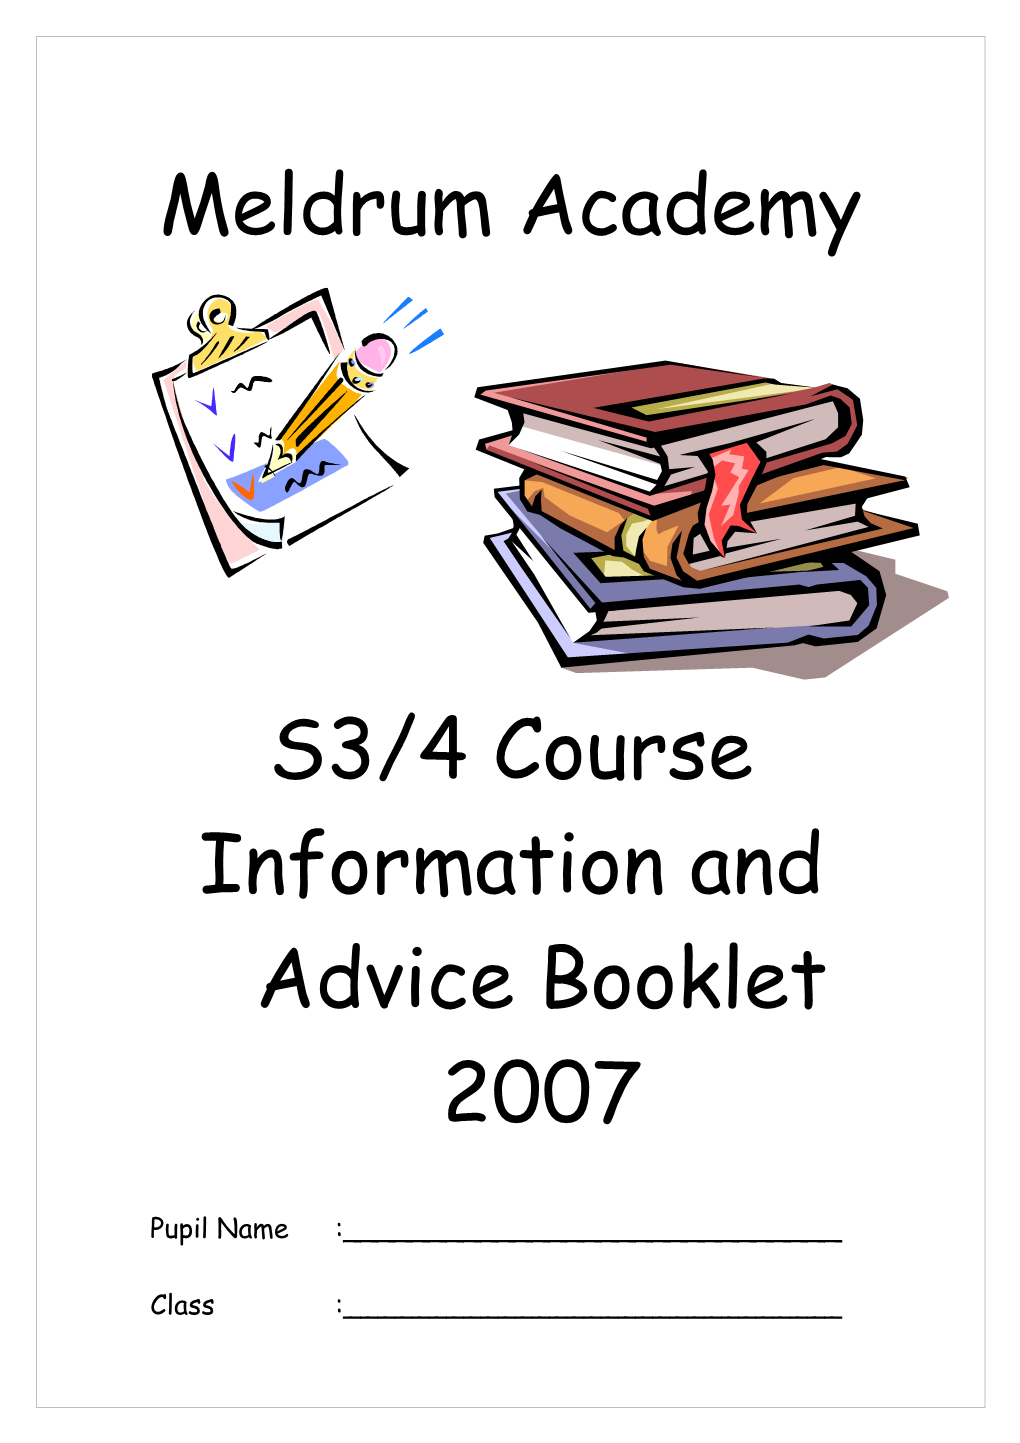 Information and Advice Booklet 2007